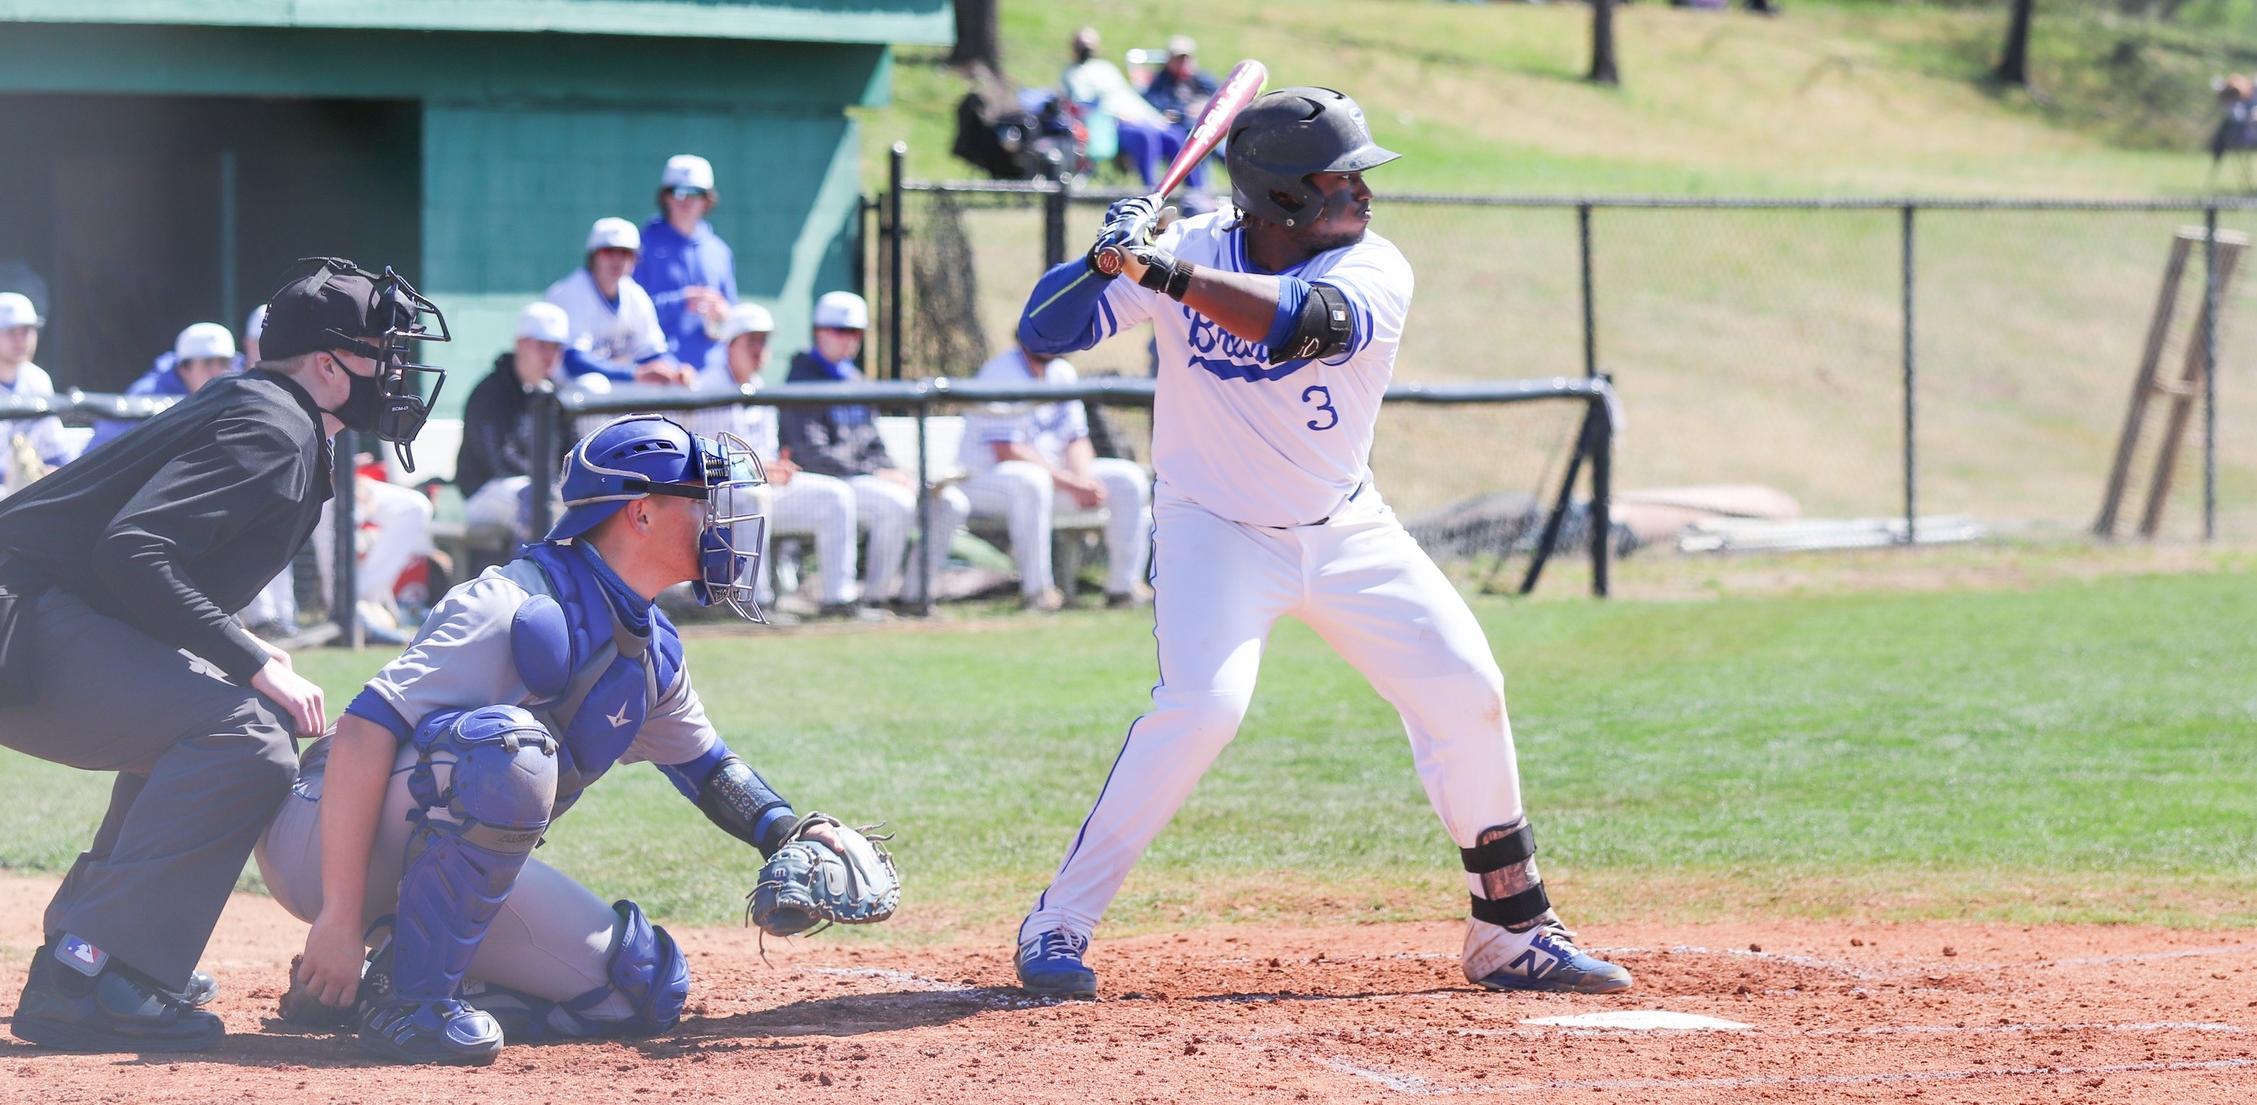 Daiquon Davenport logged two hits, including a double, vs. Pfeiffer on Tuesday (Photo courtesy of Victoria Brayman '22).